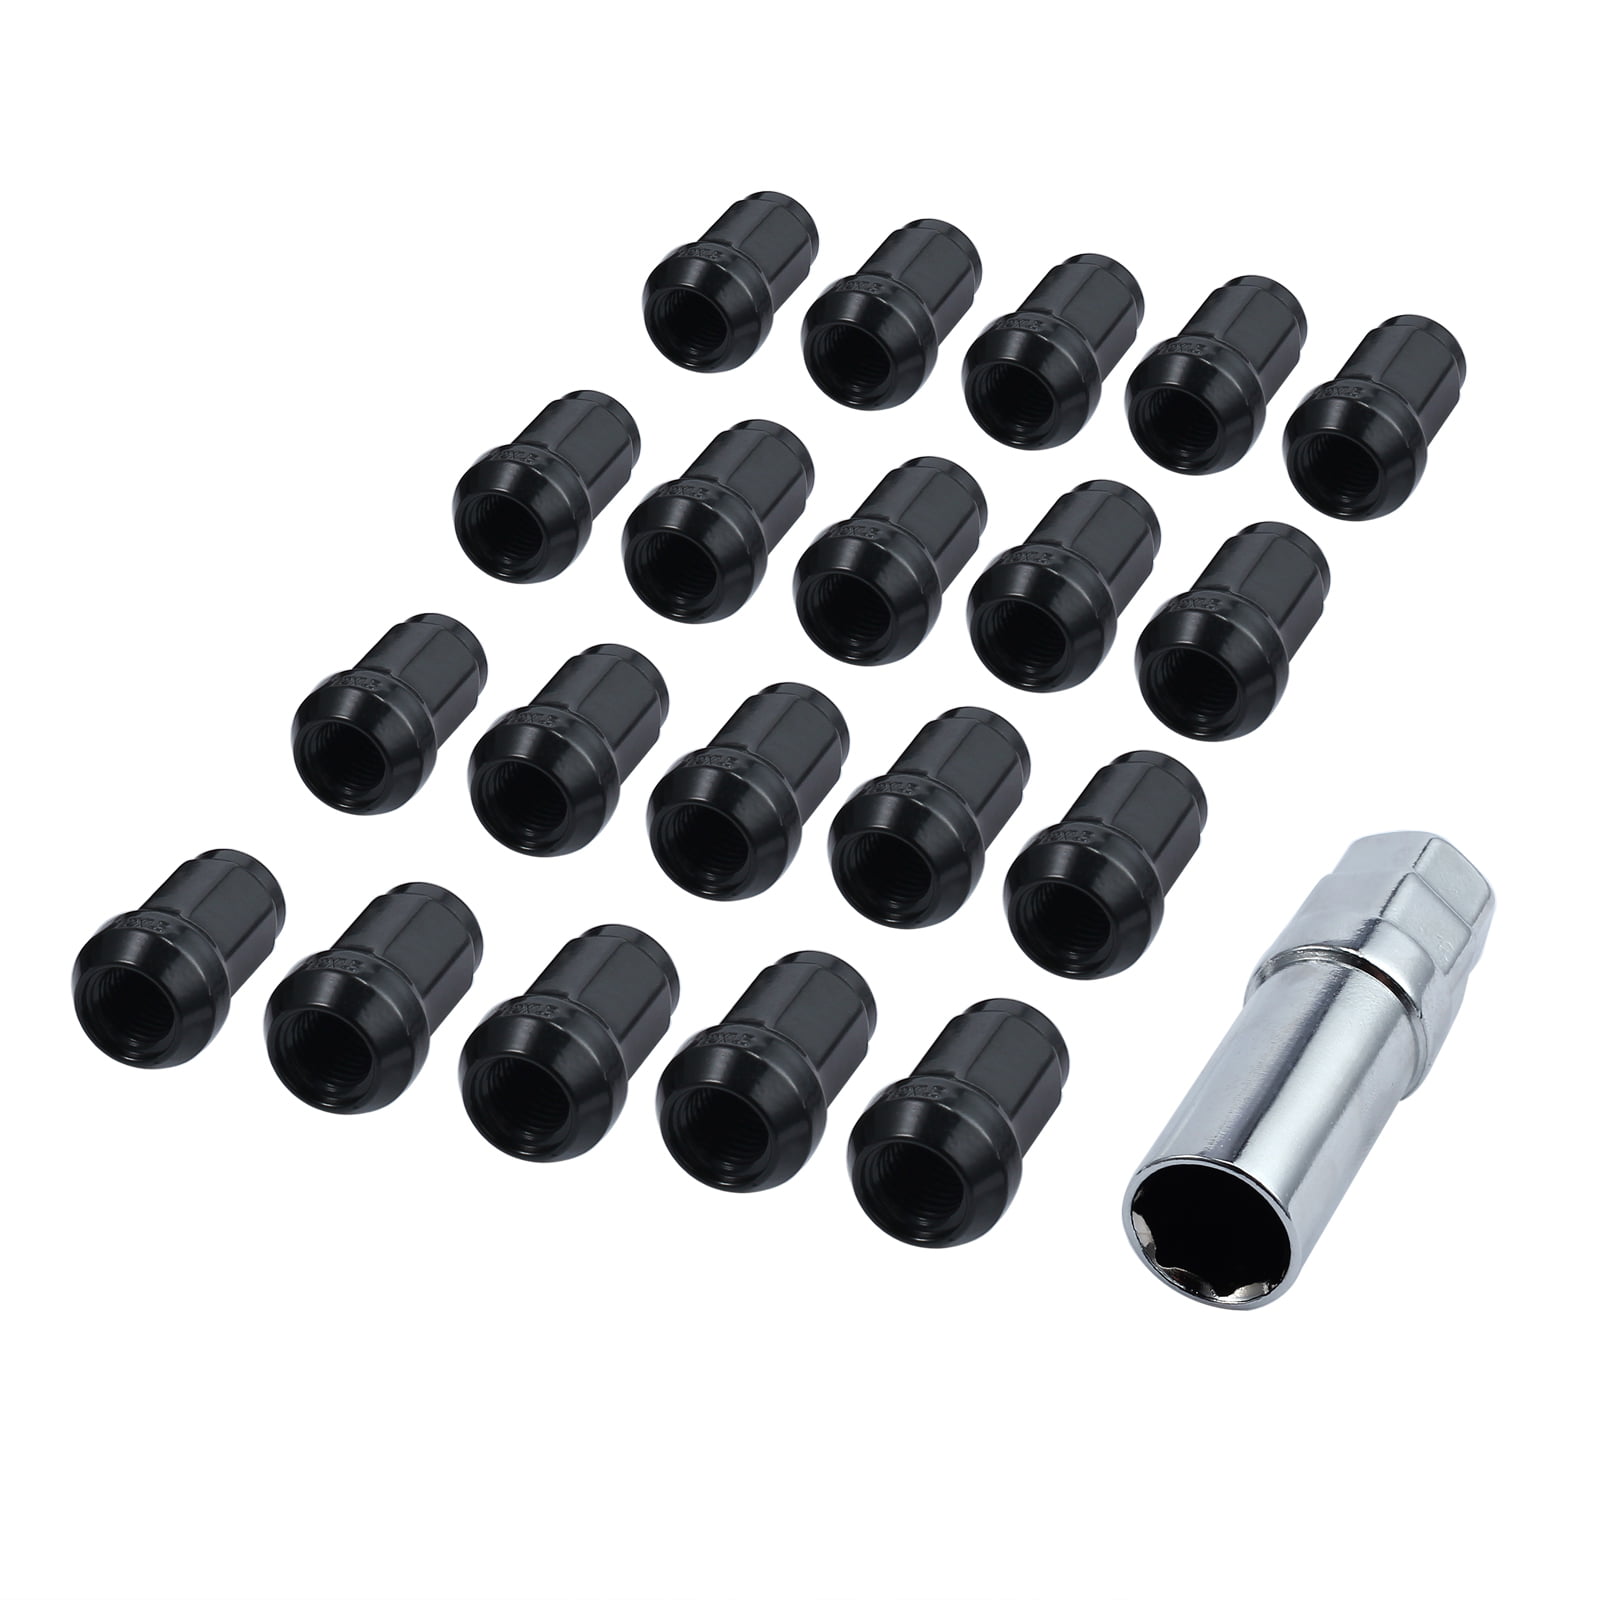 Buyer Needs to Review The spec 20pcs 1.38 Chrome 12mm X 1.5 Wheel Lug Nuts fit 1997 Mazda Protege May Fit OEM Rims 